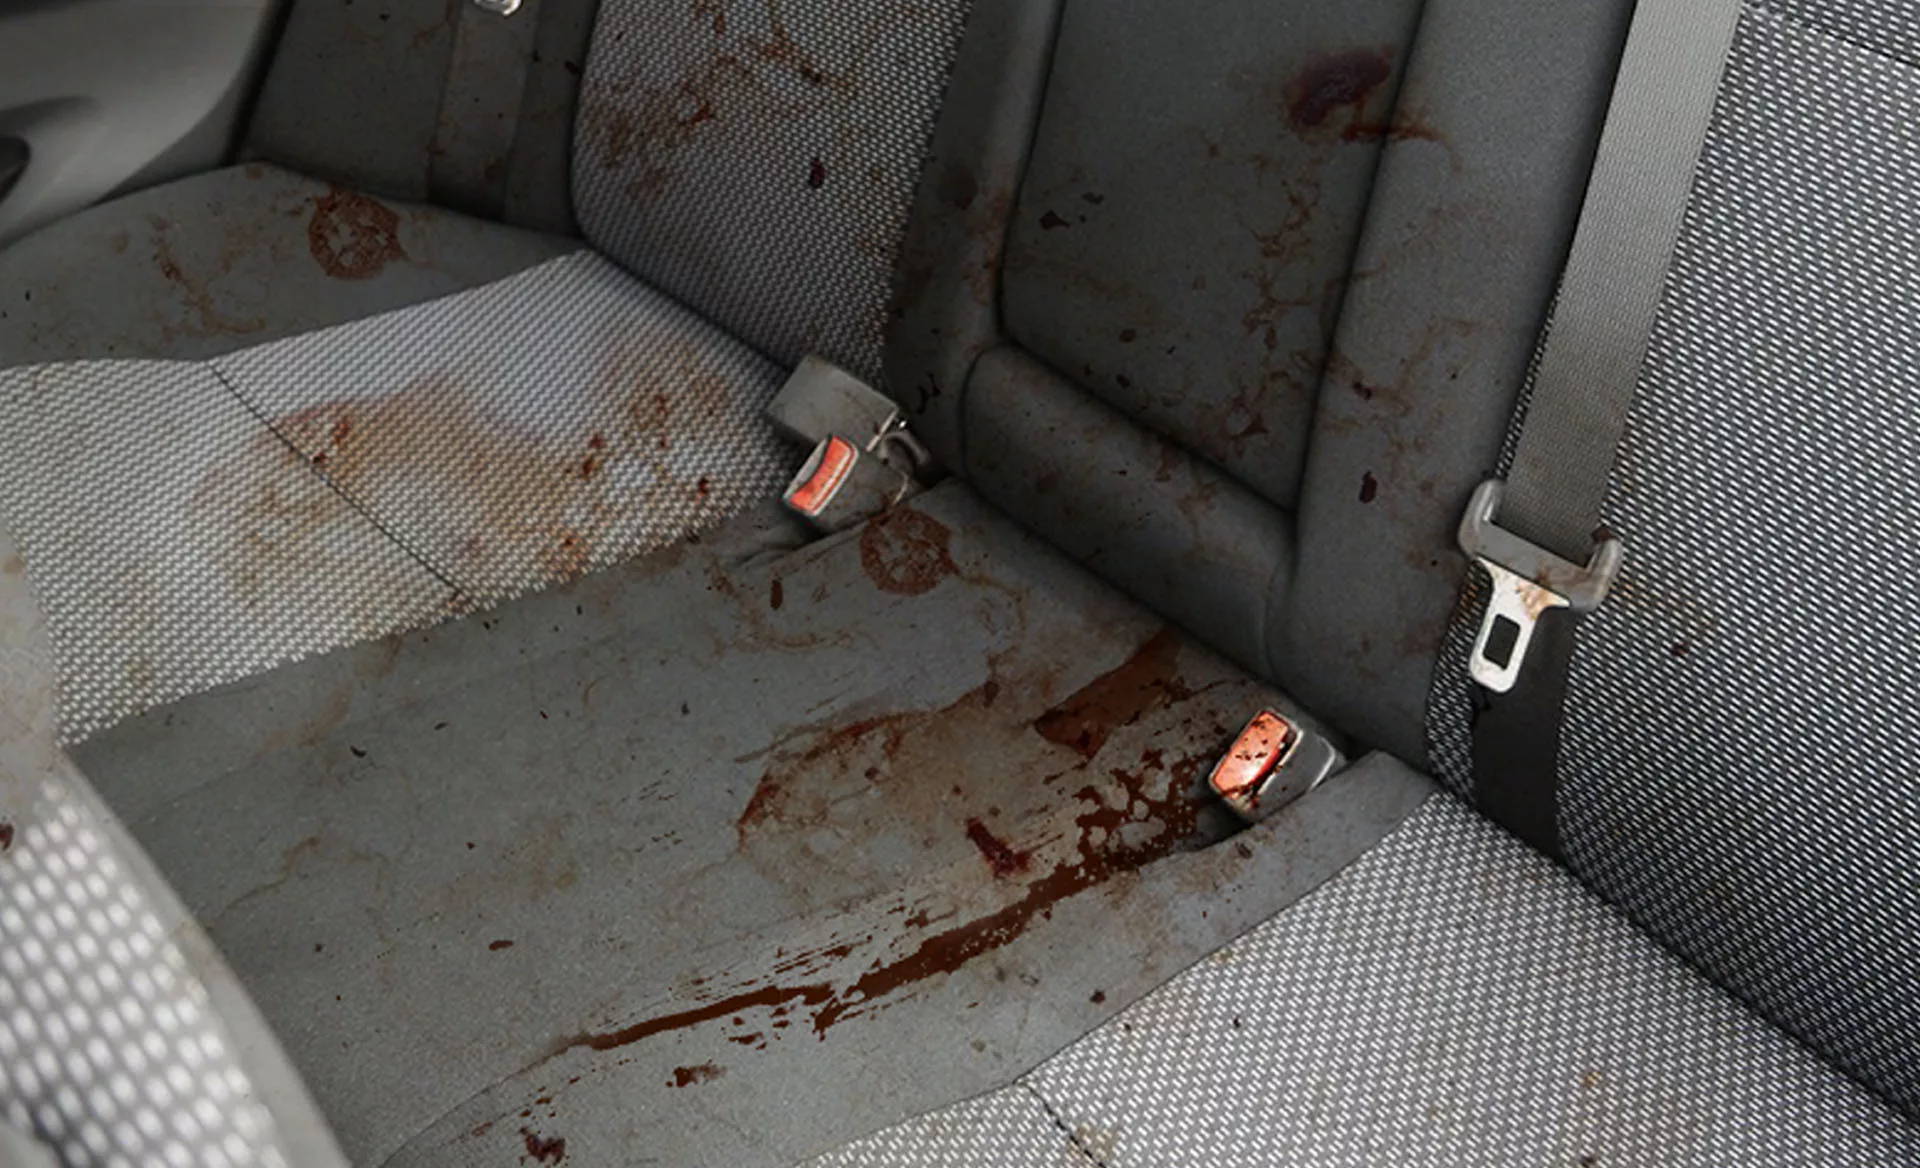 Blood and bodily fluids soaking into a vehicles seats and lining.